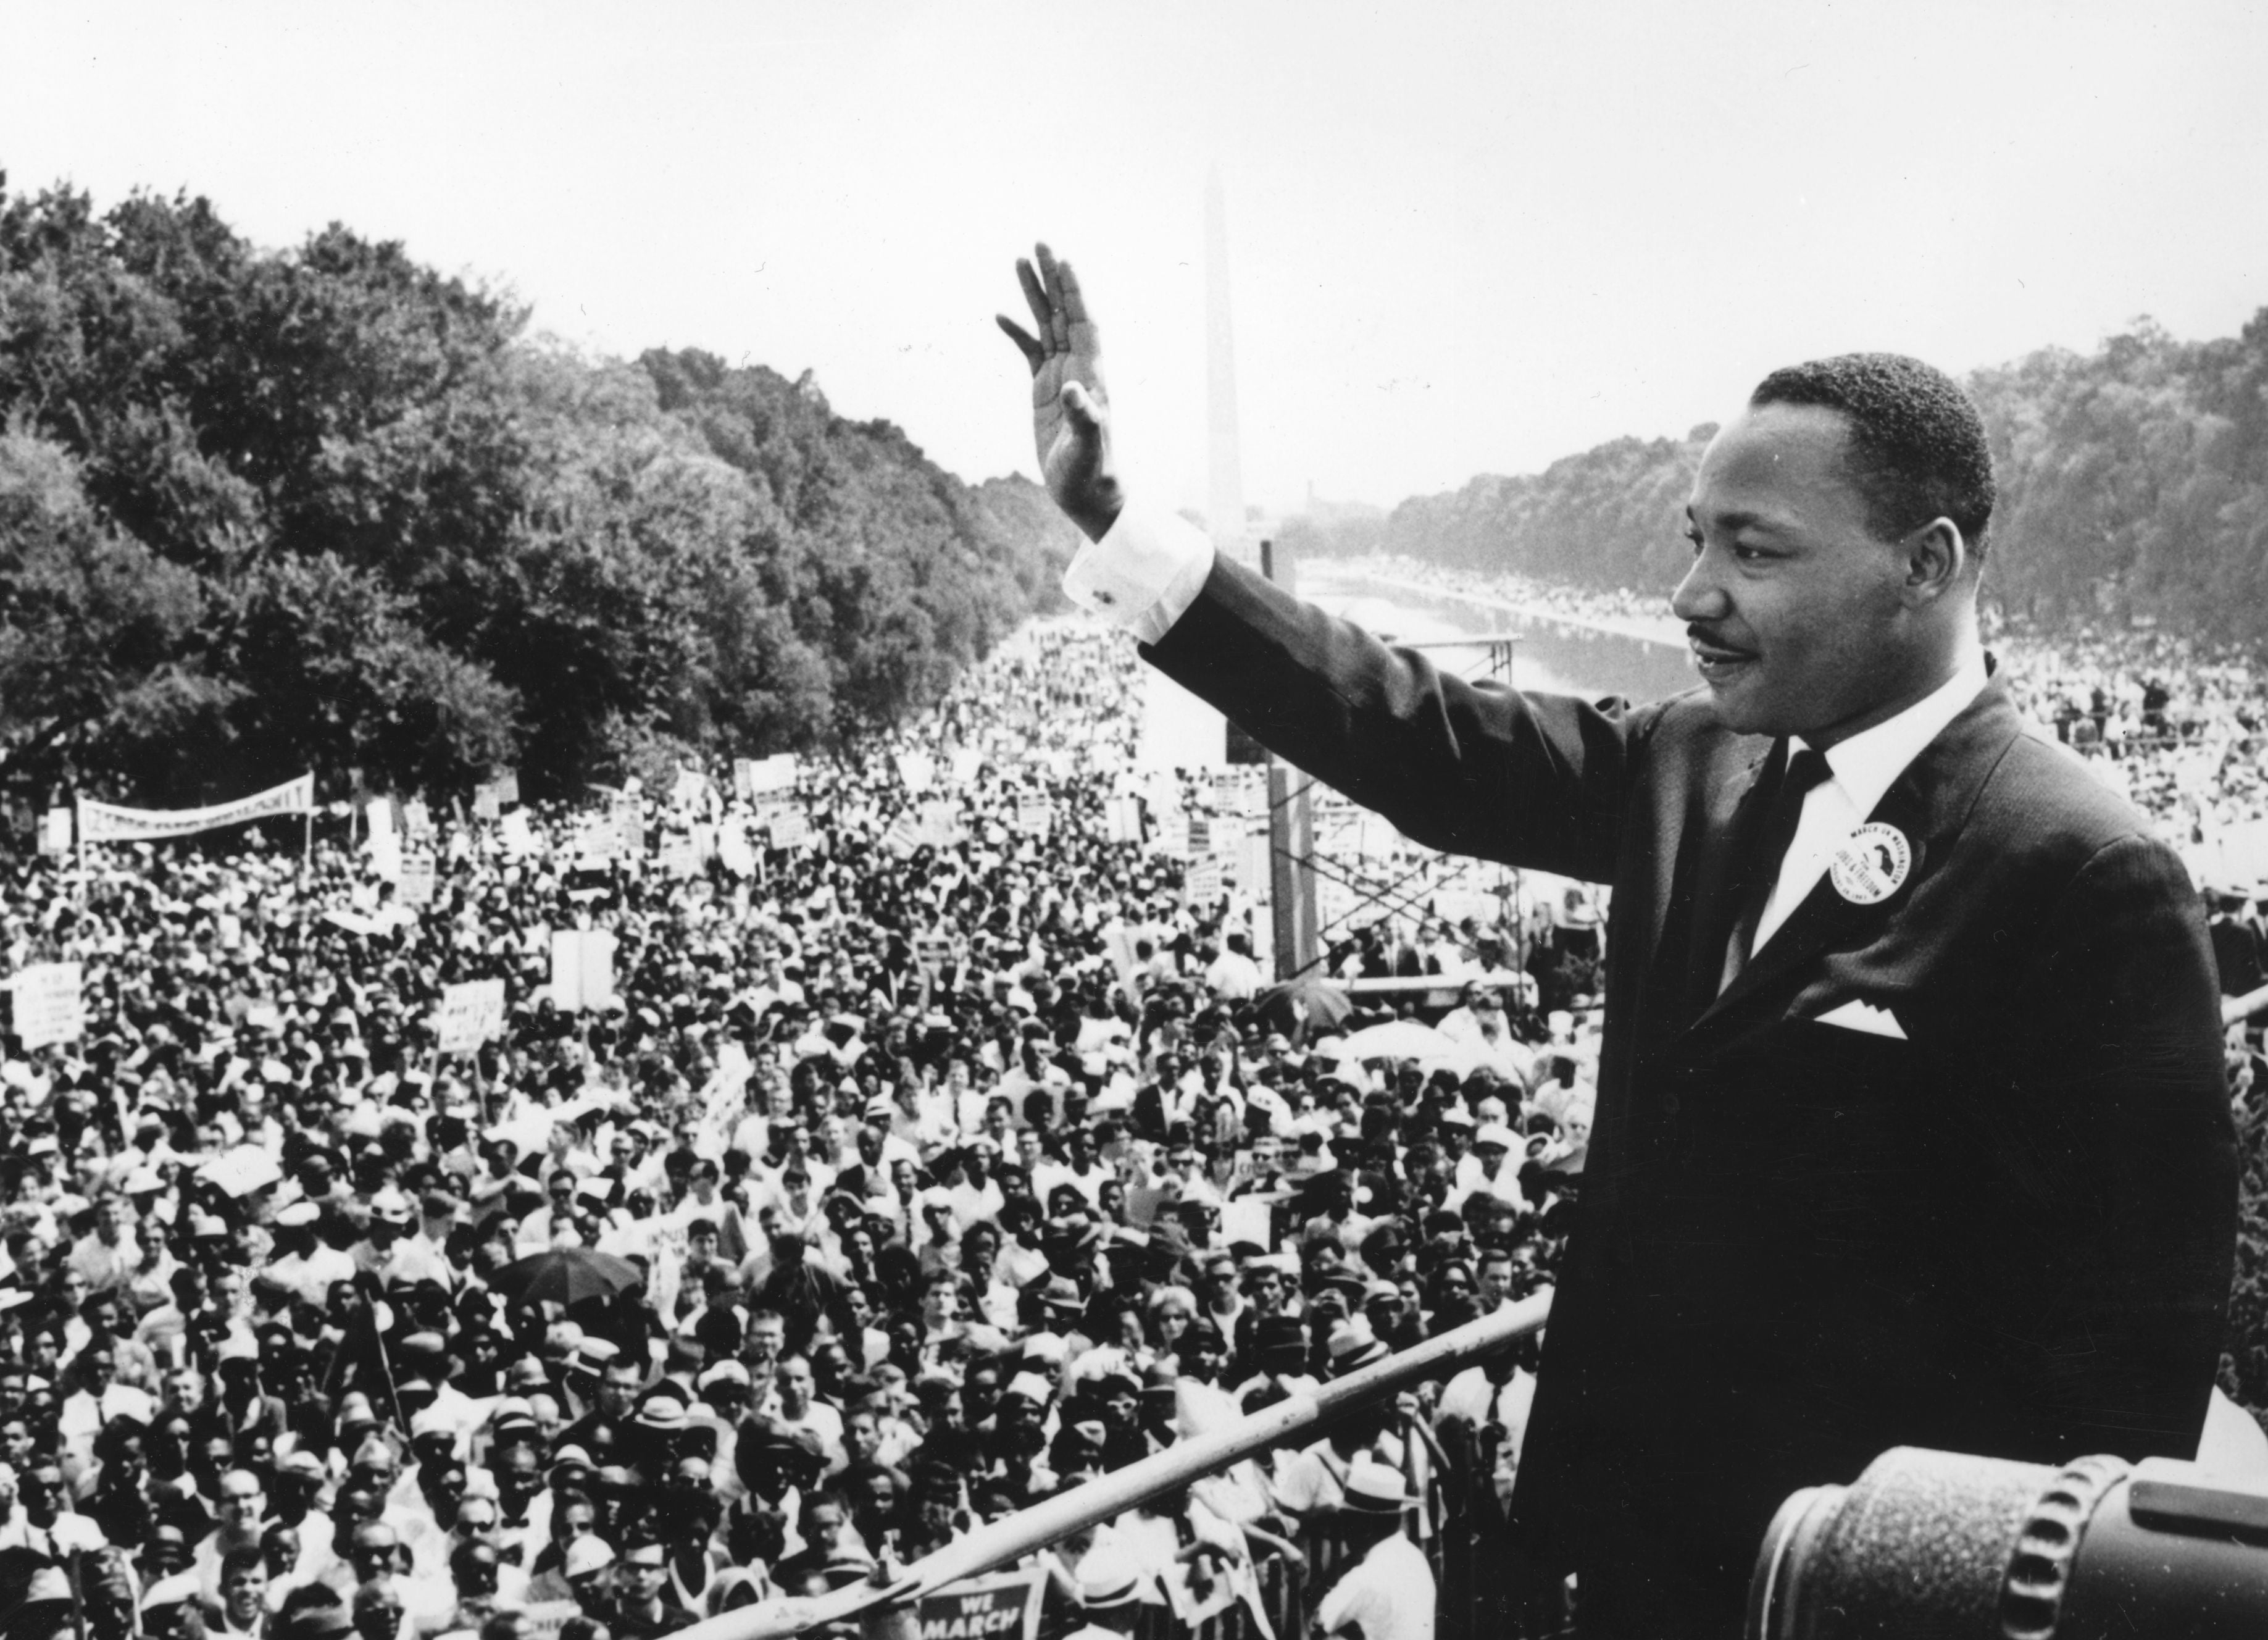 Martin Luther King Jr during the March on Washington at the Lincoln Memorial, where he gave his ‘I have a dream’ speech